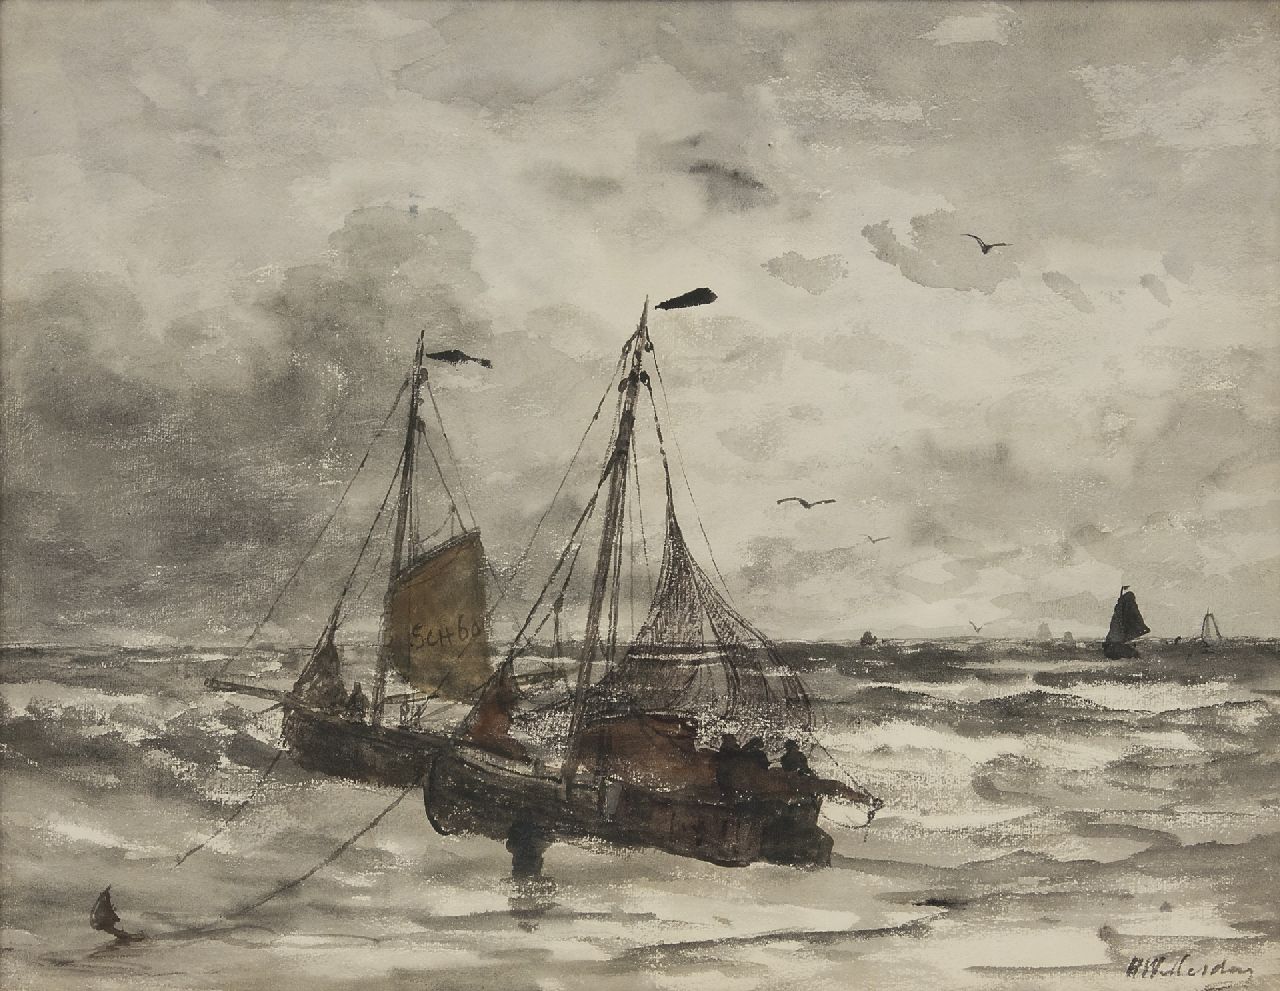 Mesdag H.W.  | Hendrik Willem Mesdag, Fishing boats at anchor in the surf, watercolour on paper 45.0 x 57.7 cm, signed l.r.